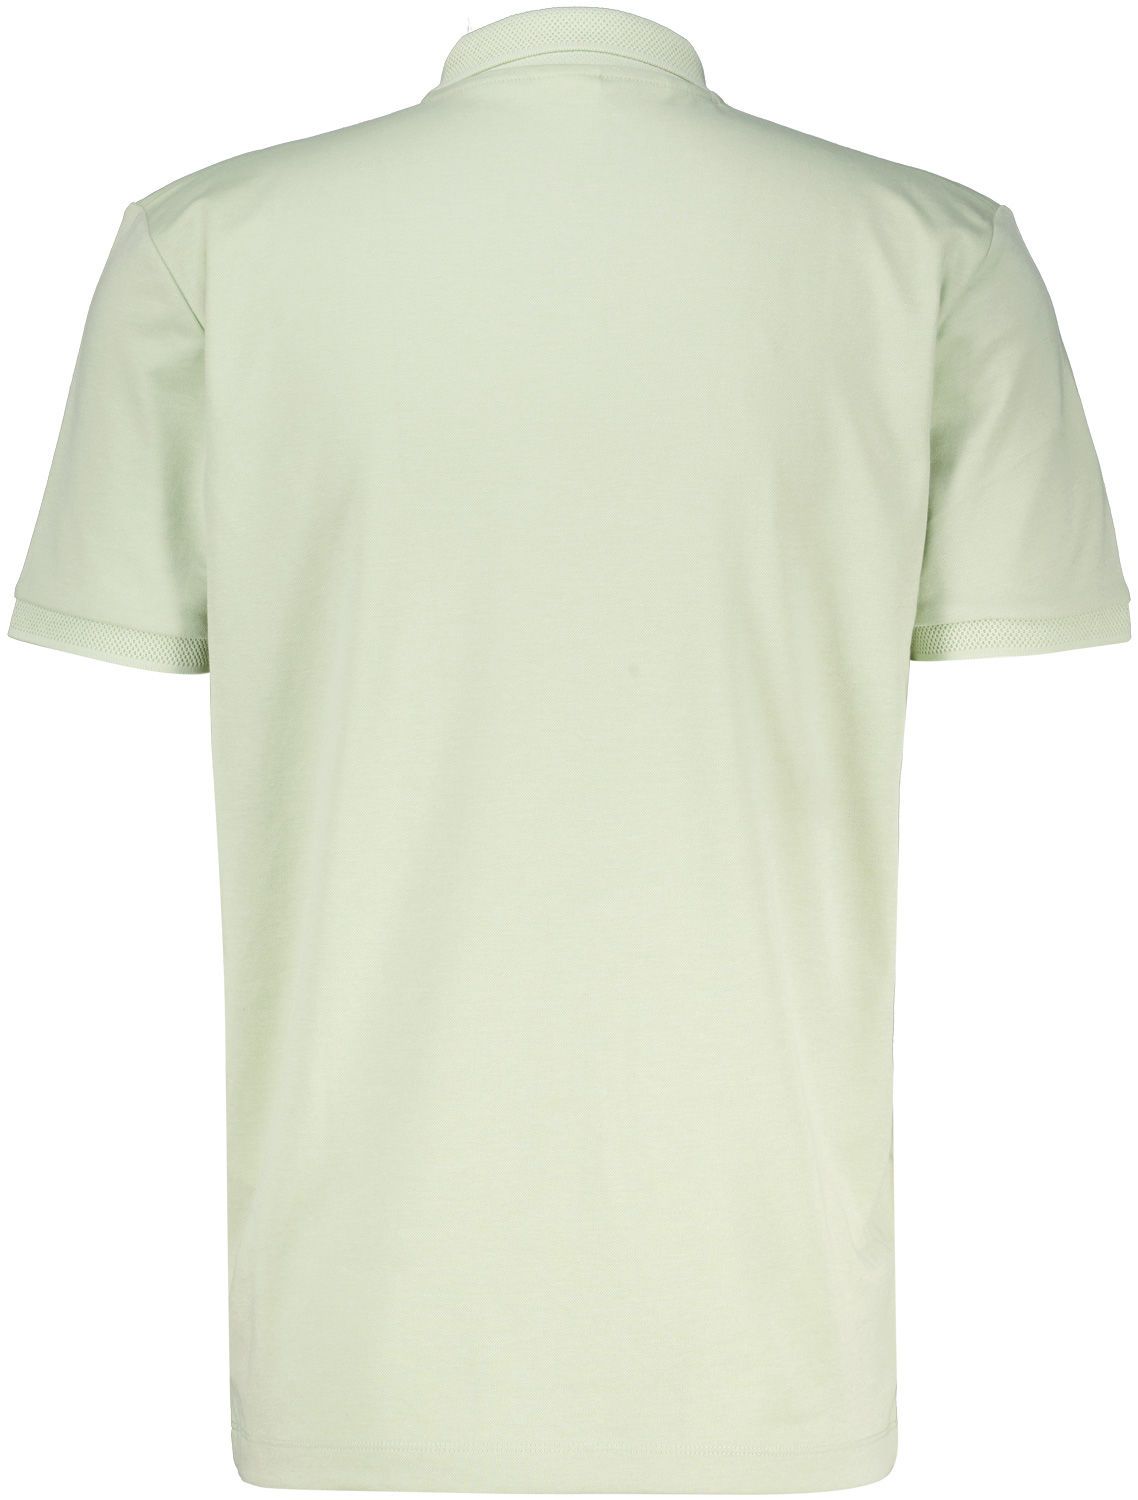 Selected Homme Polo Groen